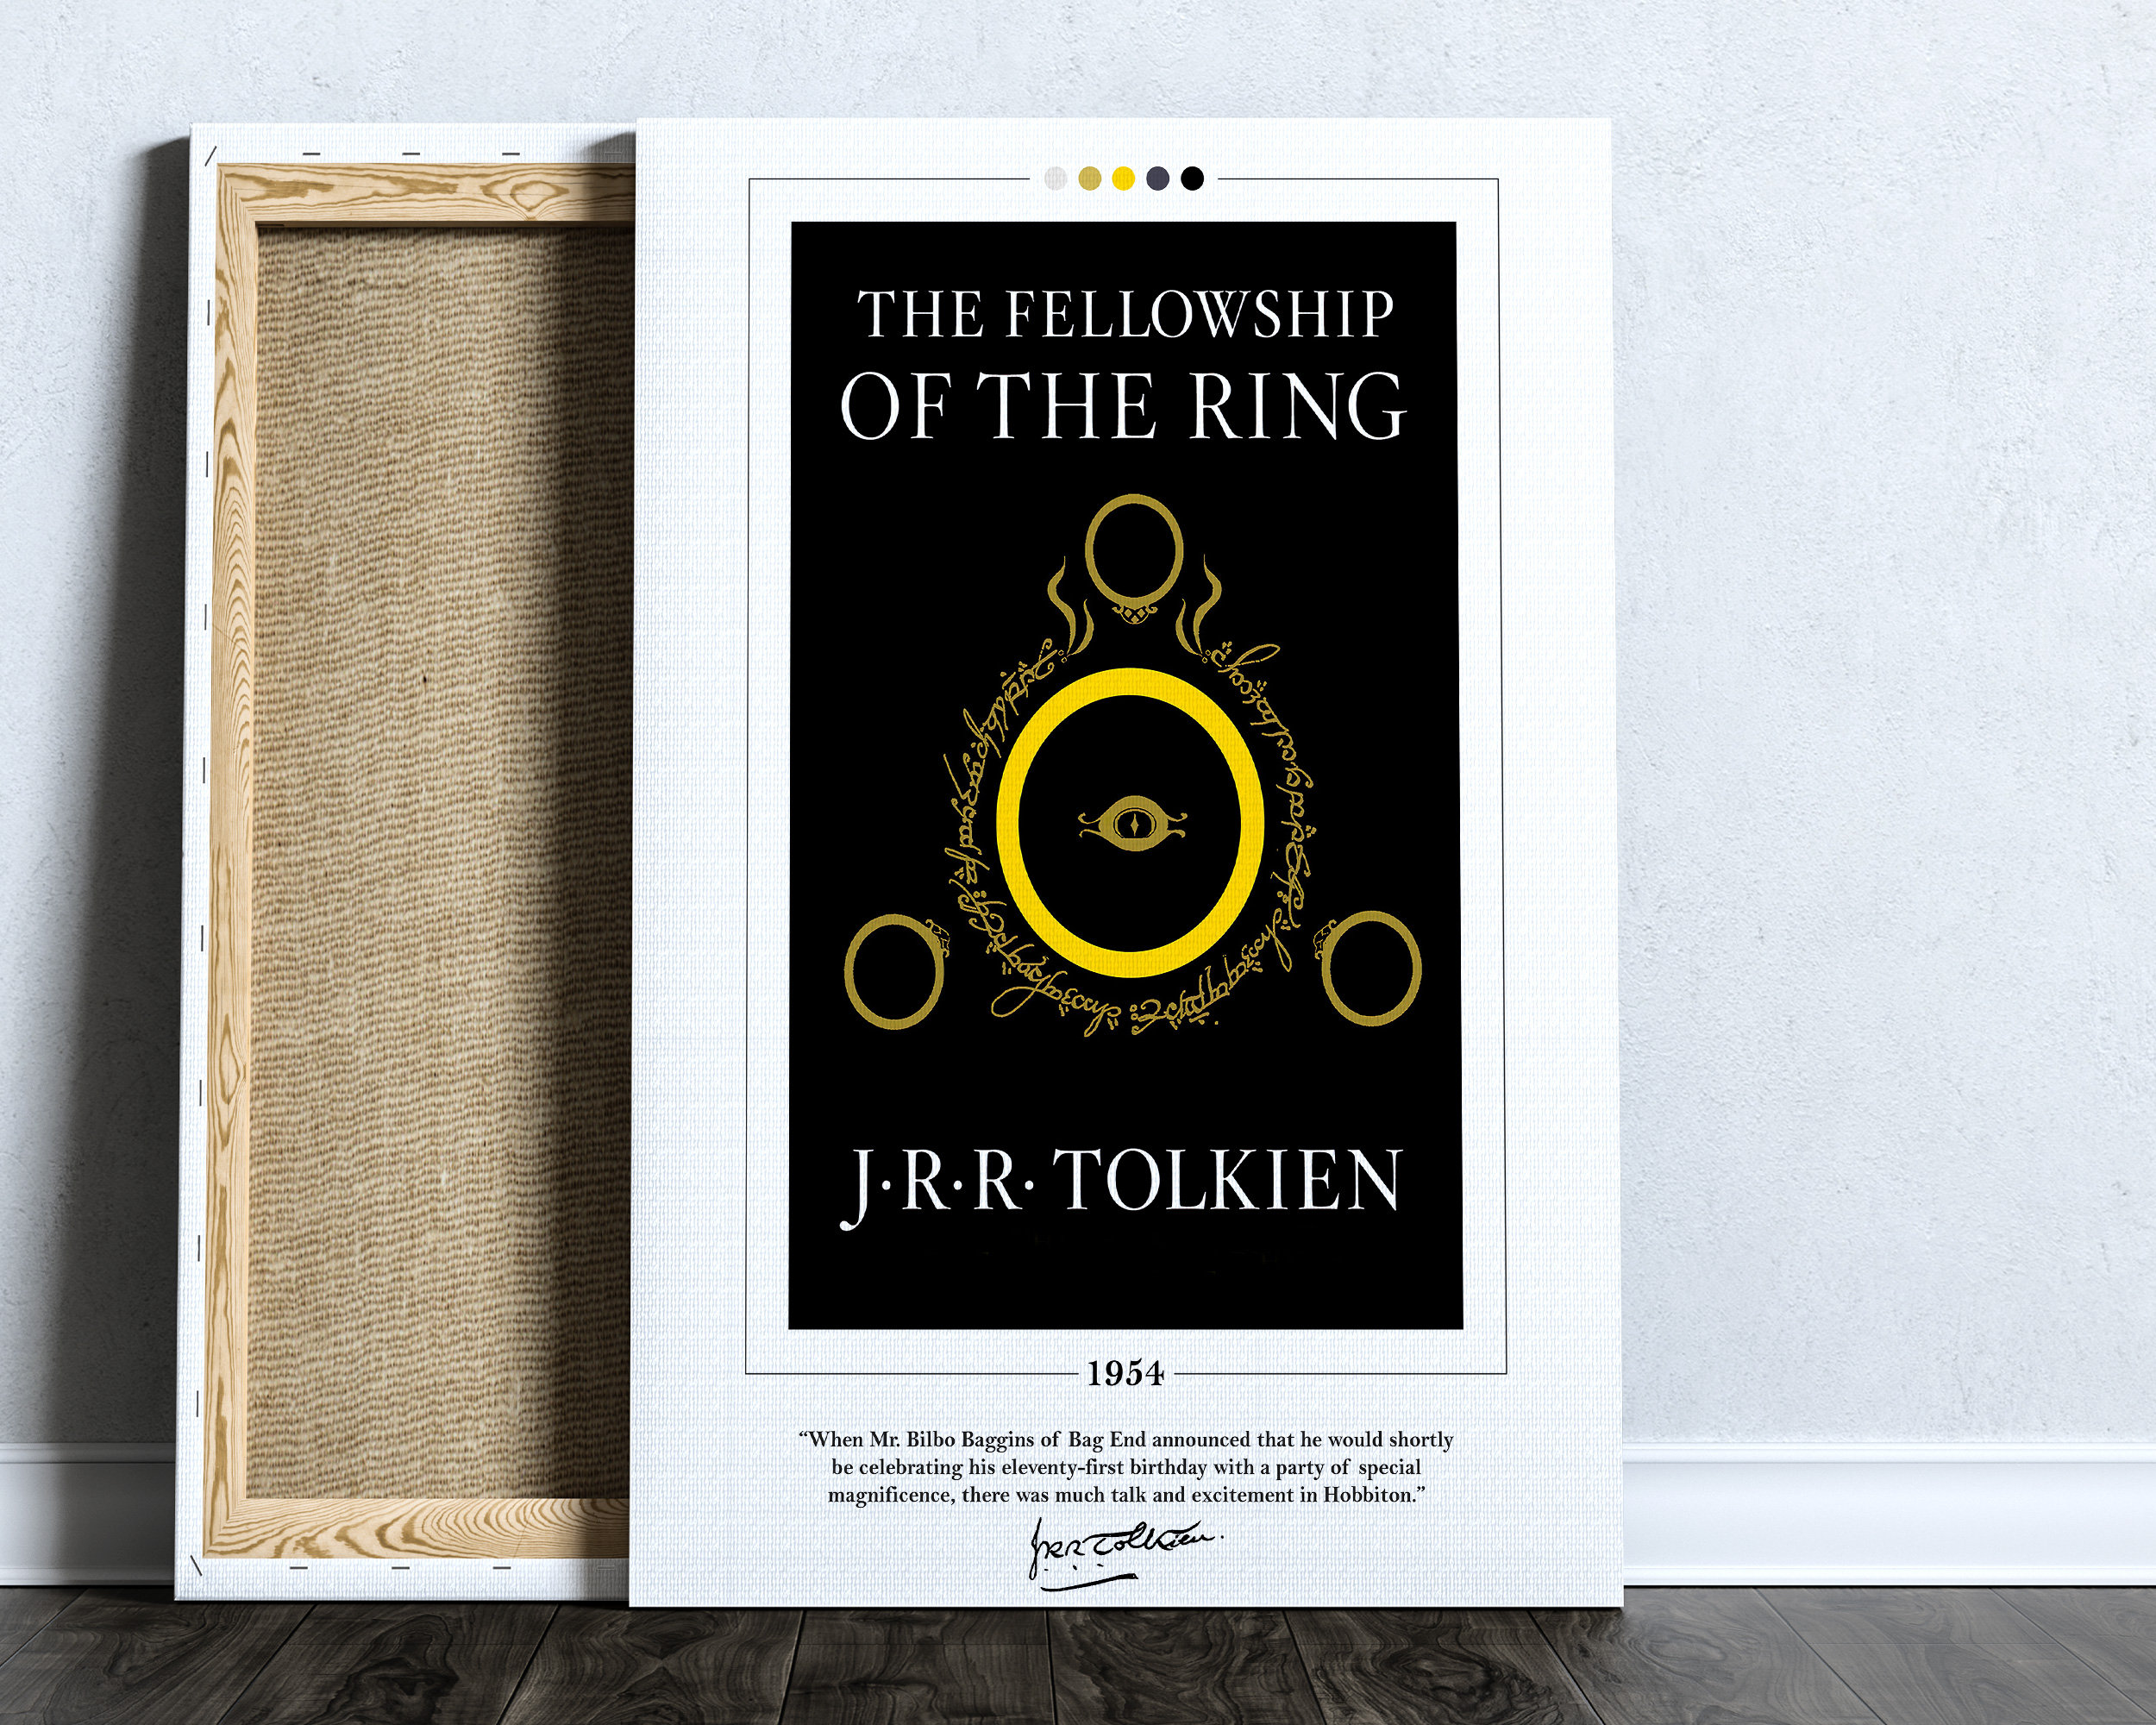 The Fellowship of the Ring Book Critique: Overrated? - HobbyLark